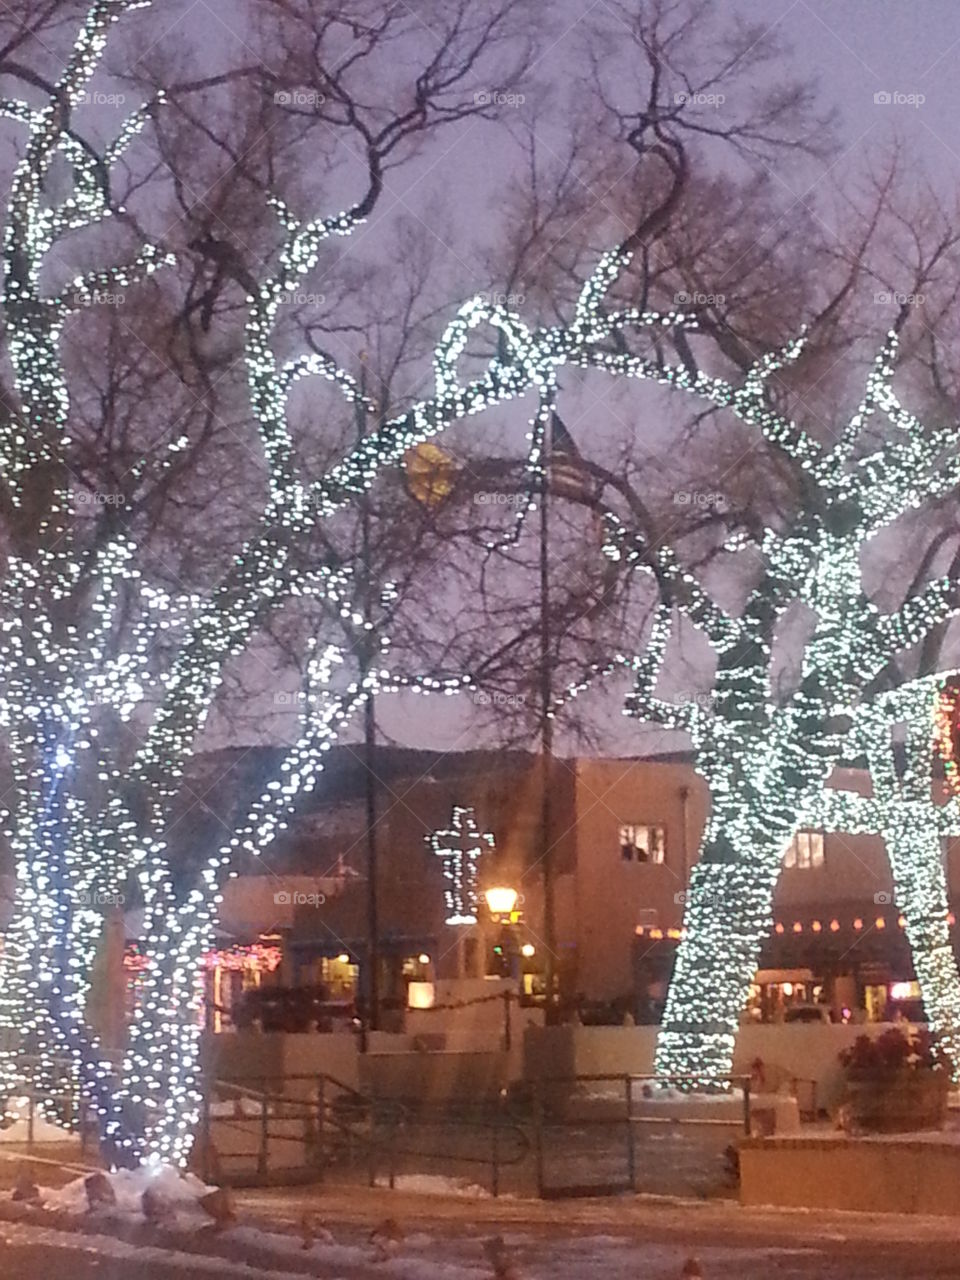 Cross lit with holiday lights in Taos Plaza, New Mexico